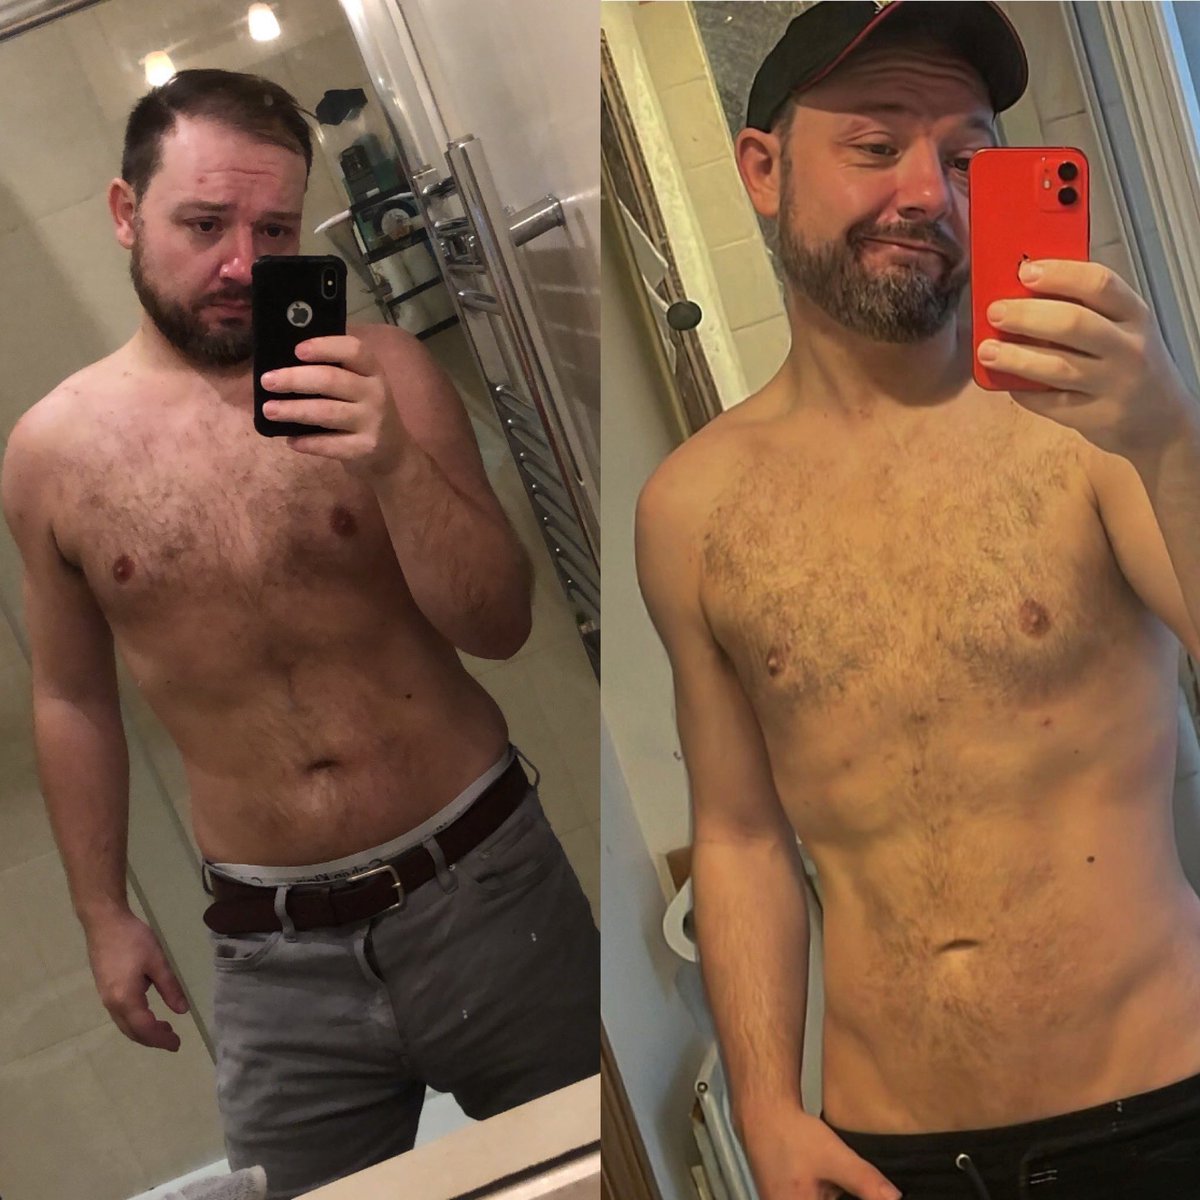 January 2024 to May 2024. This year I promised myself I’d get in shape and lose some weight. 5 months in and I’m a little proud of myself. Gym 4 times a week, serious diet and portion control. #weightloss #fitness #lgbt